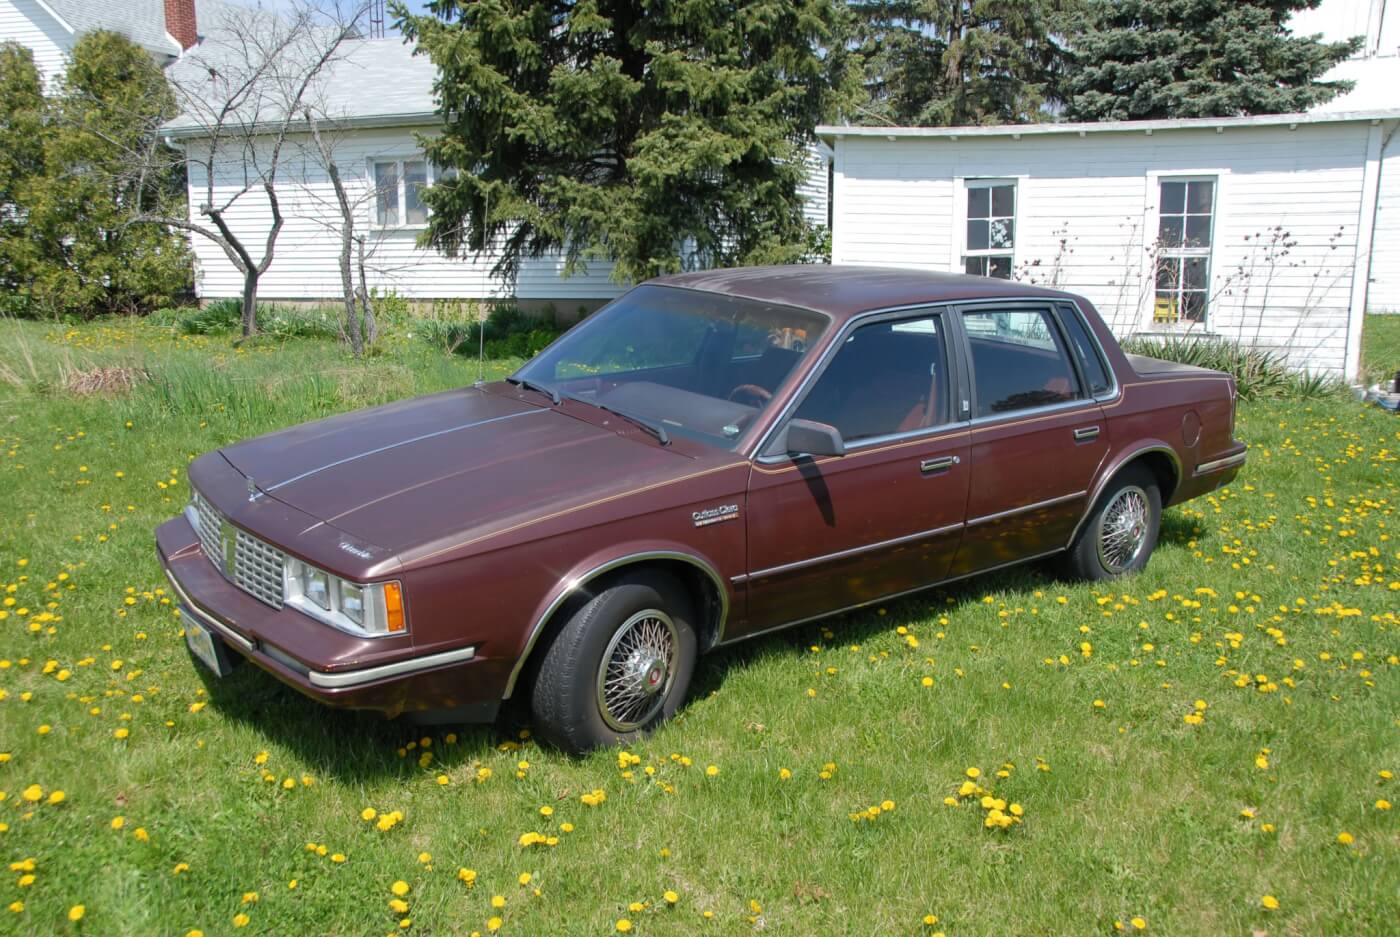 The Dark Maple Red Metallic paint may be fading but you can still see the lovely lines that made the Cutlass Ciera Oldsmobile’s best selling car for 14 years. This one was built in March of 1983 and sold to the Verhoff family by Jack Howell Chevrolet-Oldsmobile in Ottawa, Ohio, for the princely sum of $10,818. Base price for the LS Sedan was $8,892. Add to that the 4.3L diesel ($500), four-season air conditioning ($725), body side moldings ($55), accent stripe ($42), rocker panel moldings ($56), 14-inch radial tire upgrade ($36.60) and block heater ($42). There was a credit of $56 for a radio delete.